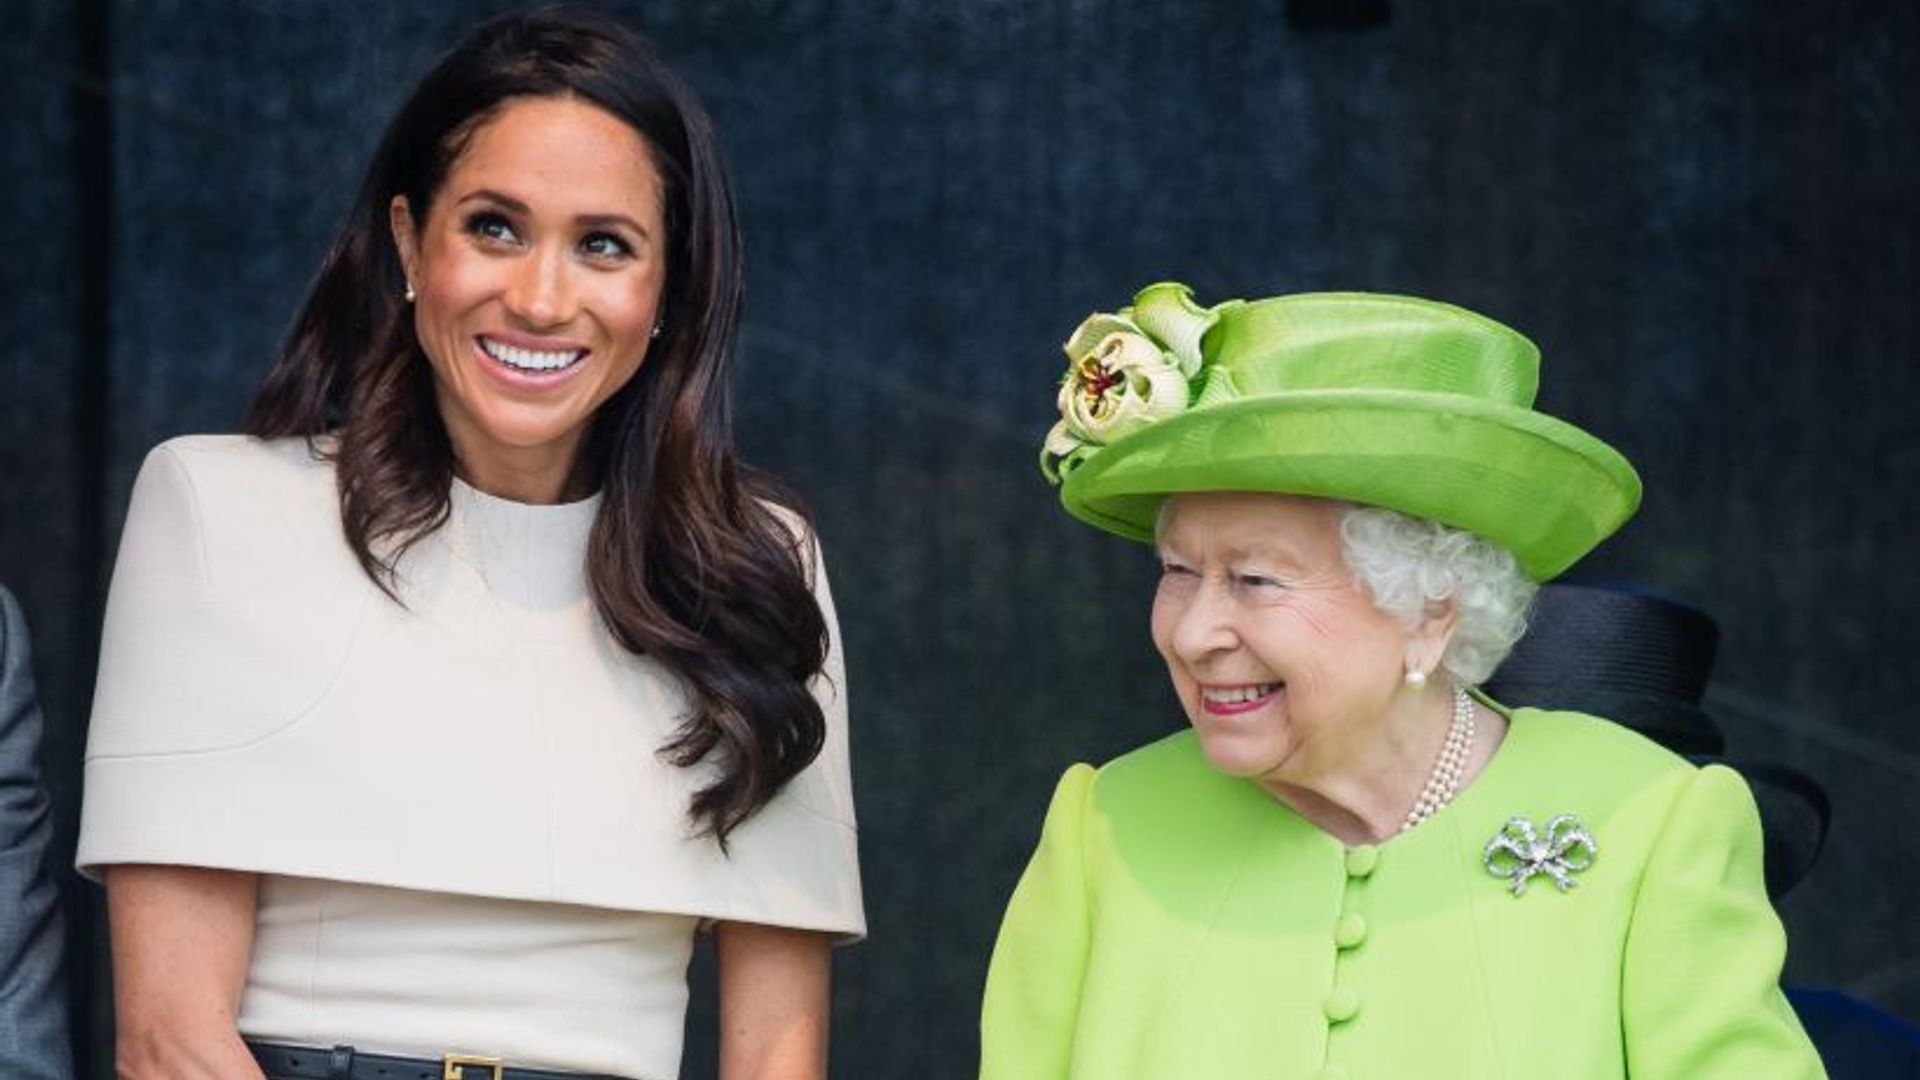 The Queen Meghan Markle Cheshire